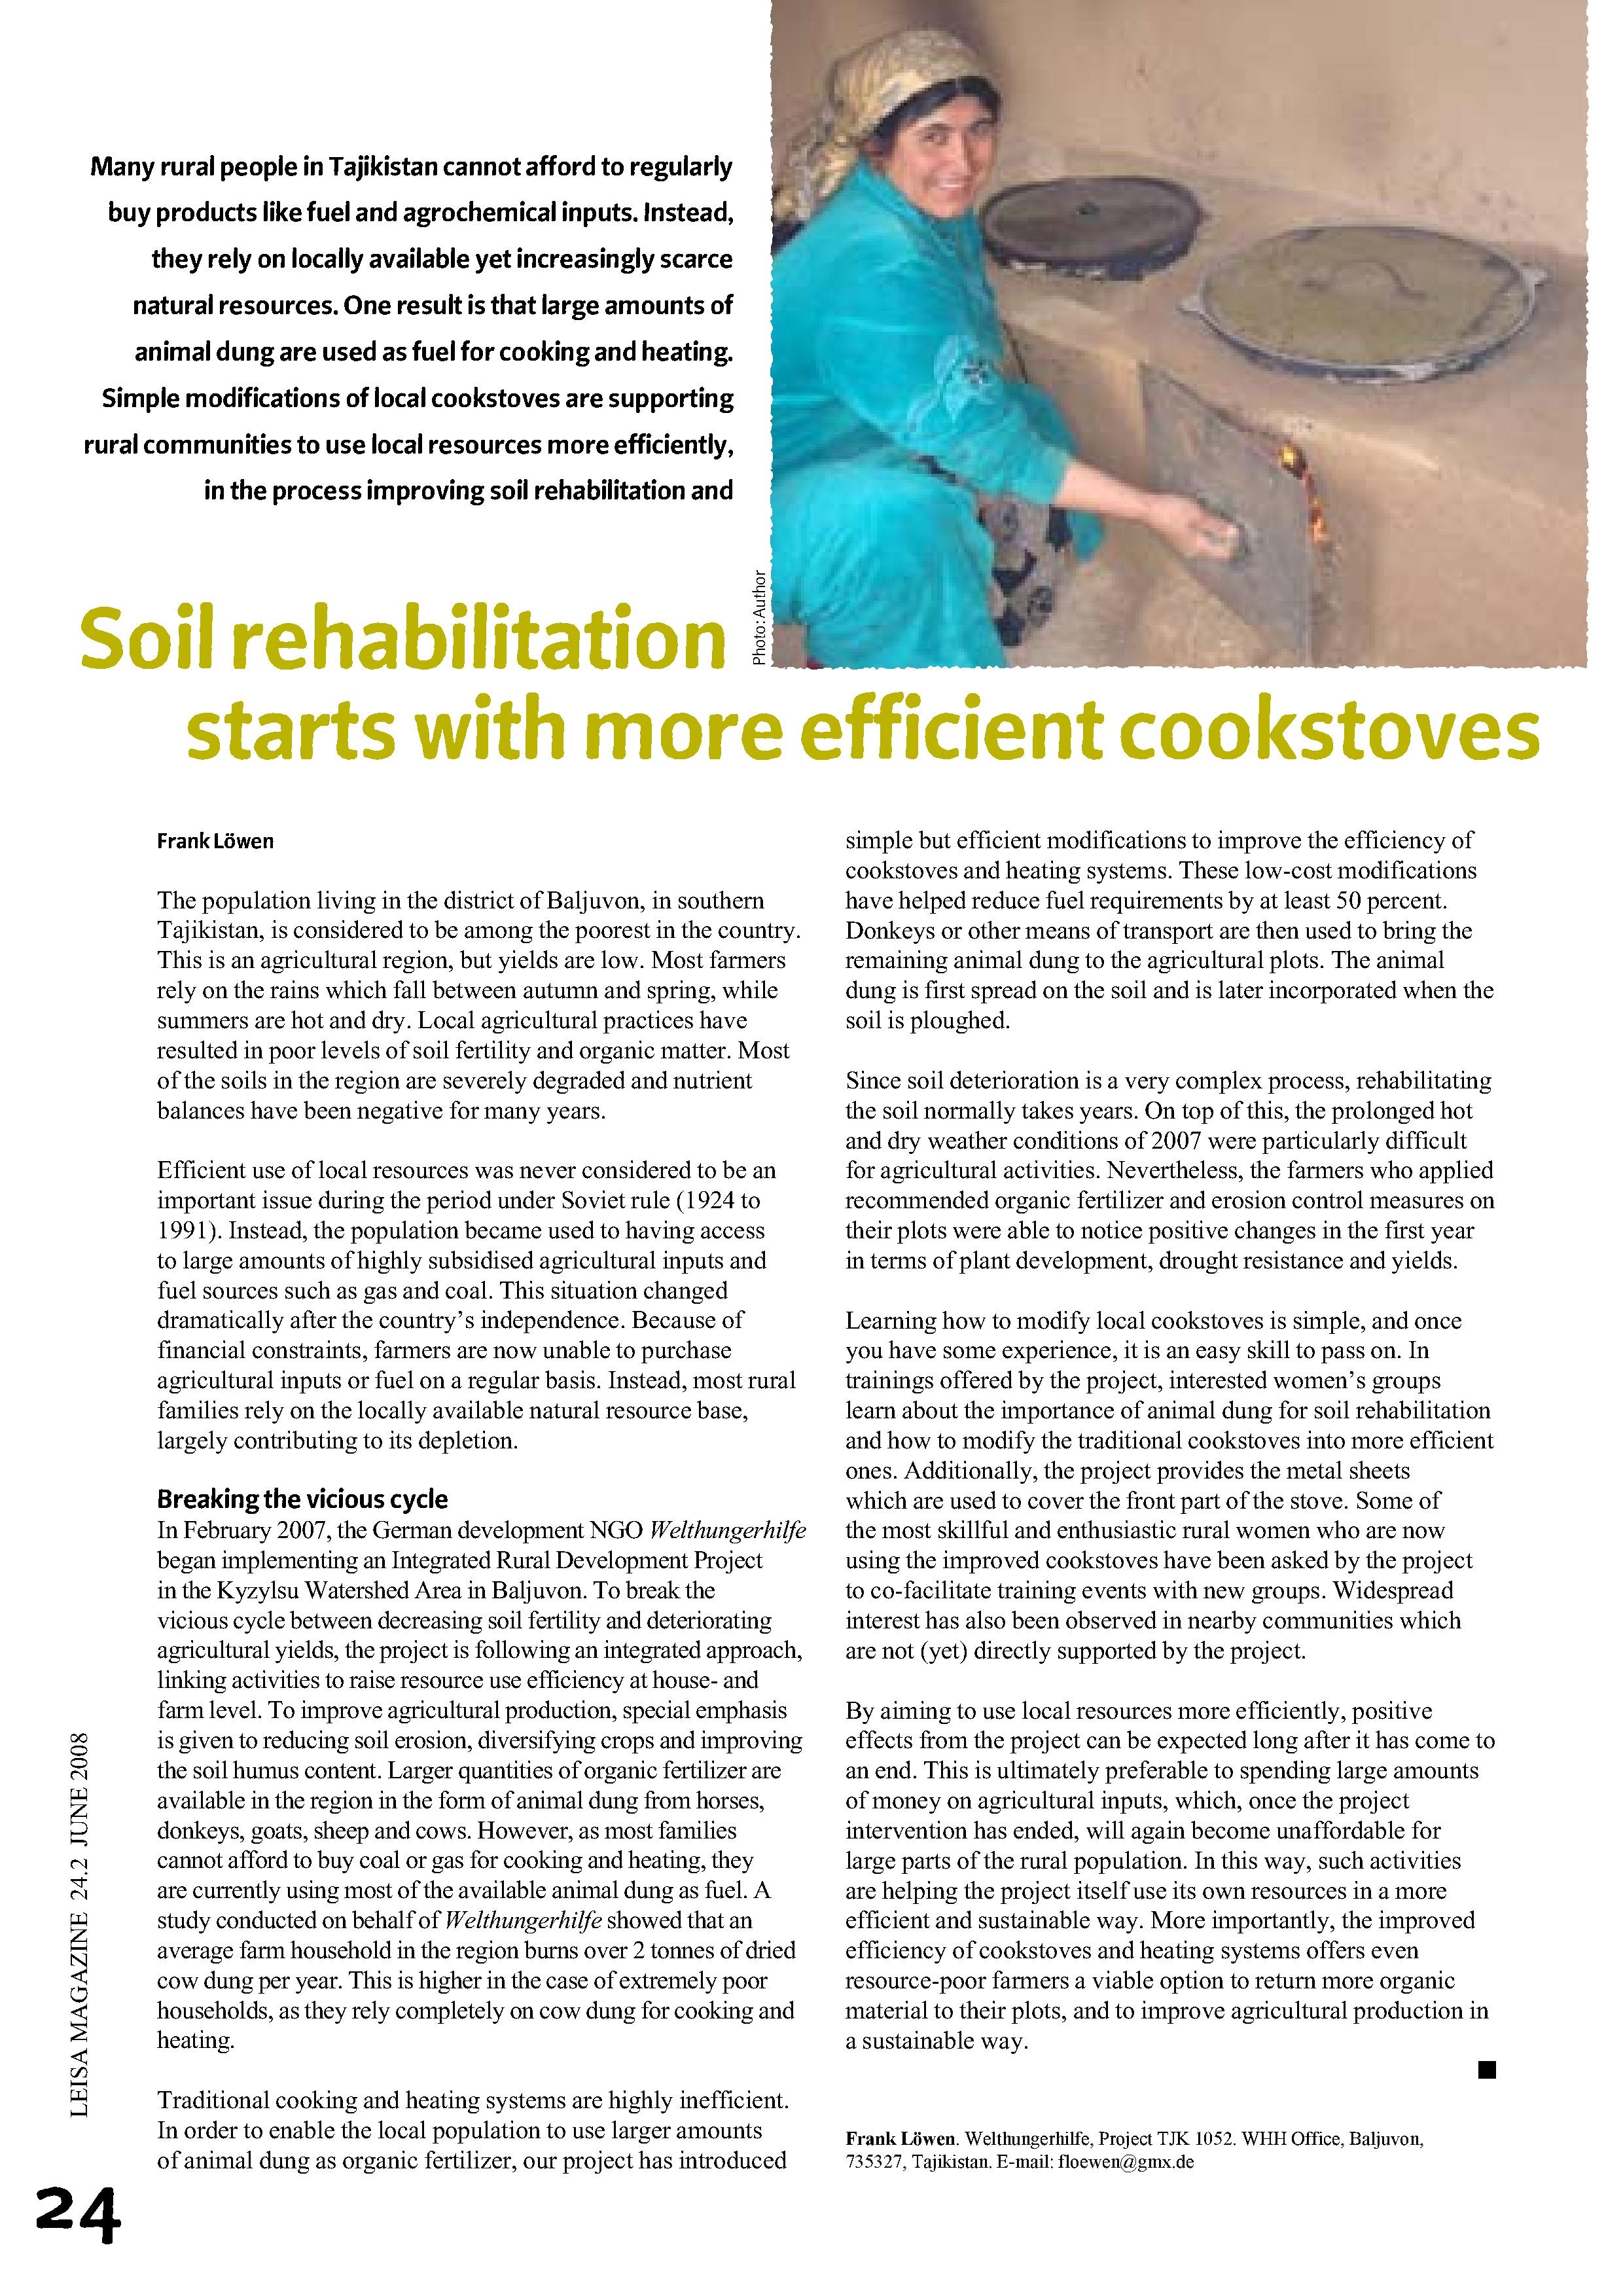 Soil rehabilitation starts with more efficient cookstoves